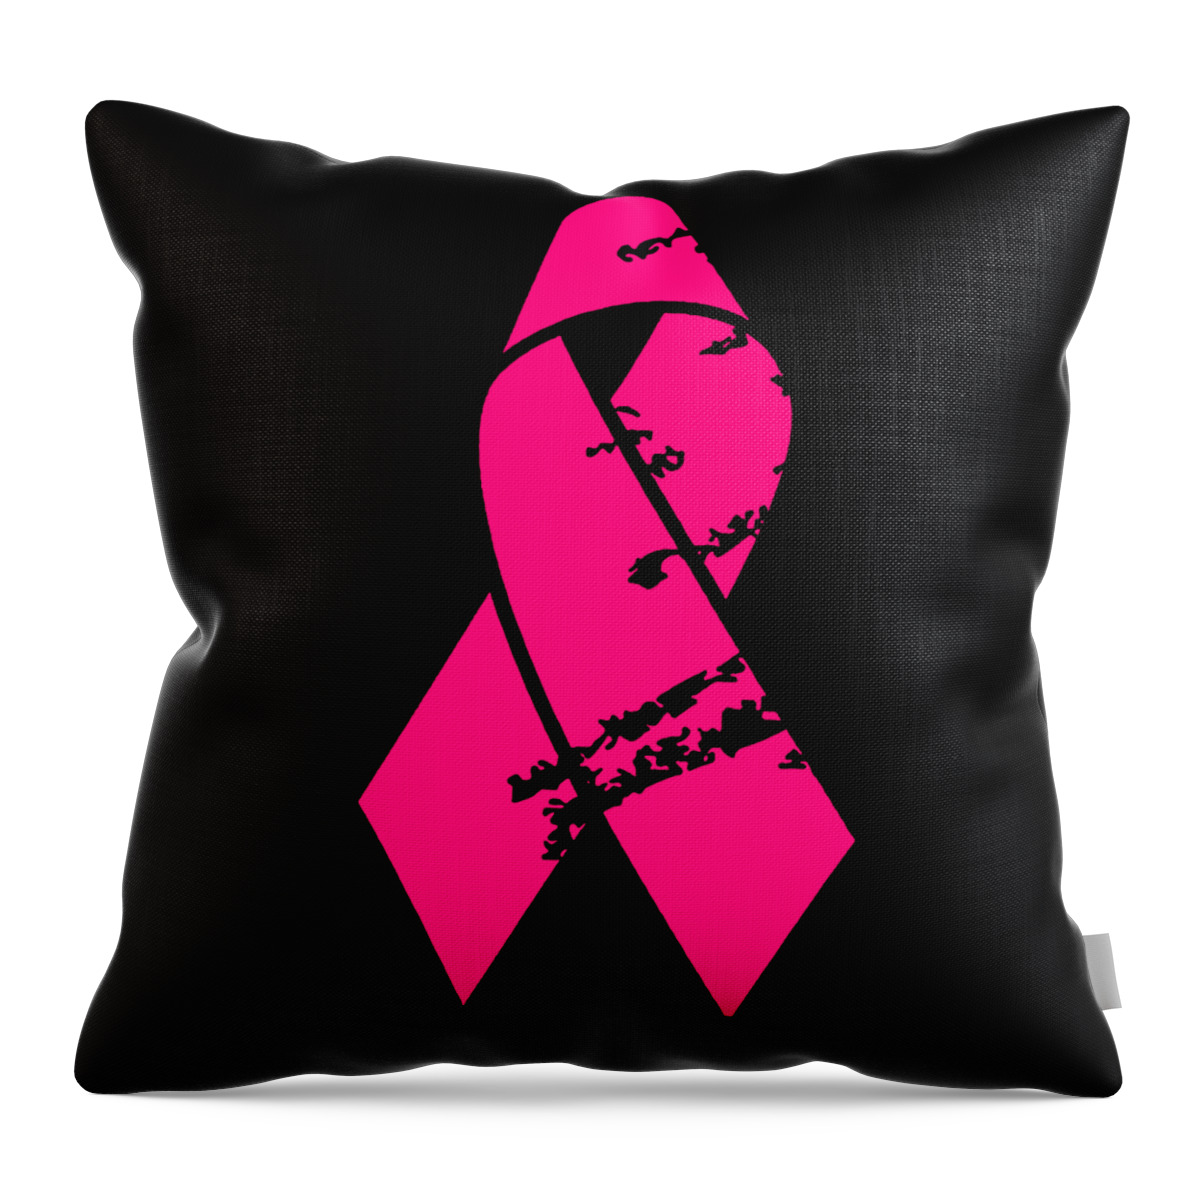 Funny Throw Pillow featuring the digital art Distressed Pink Ribbon by Flippin Sweet Gear